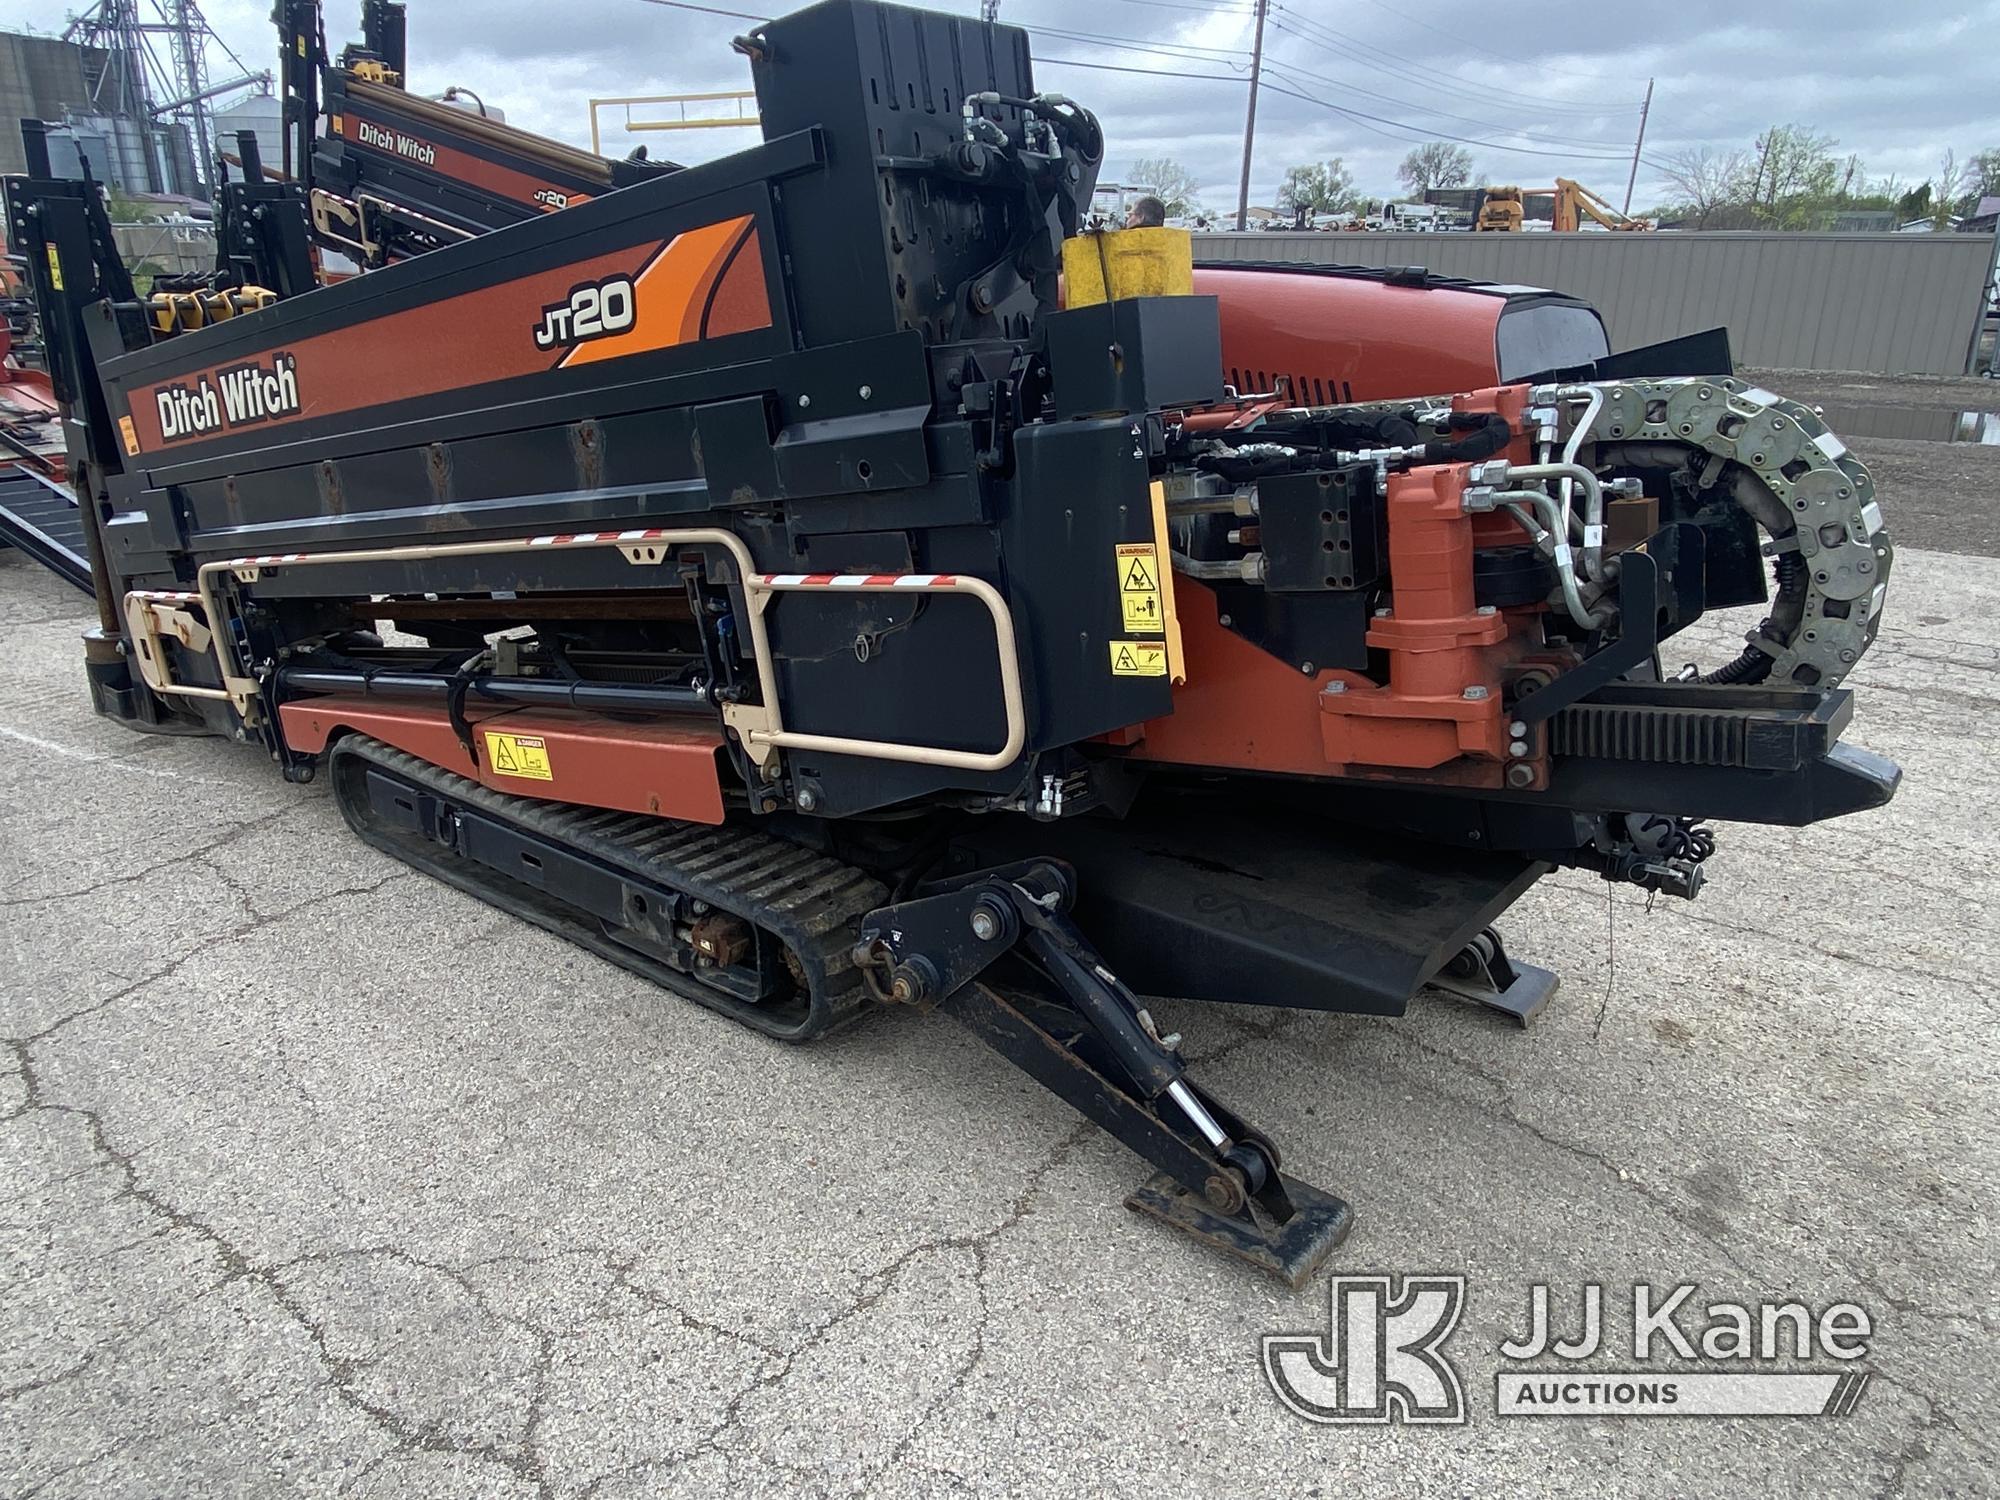 (South Beloit, IL) 2017 Ditch Witch JT20 Directional Boring Machine, To Be Sold with Lot# t3564 (Equ